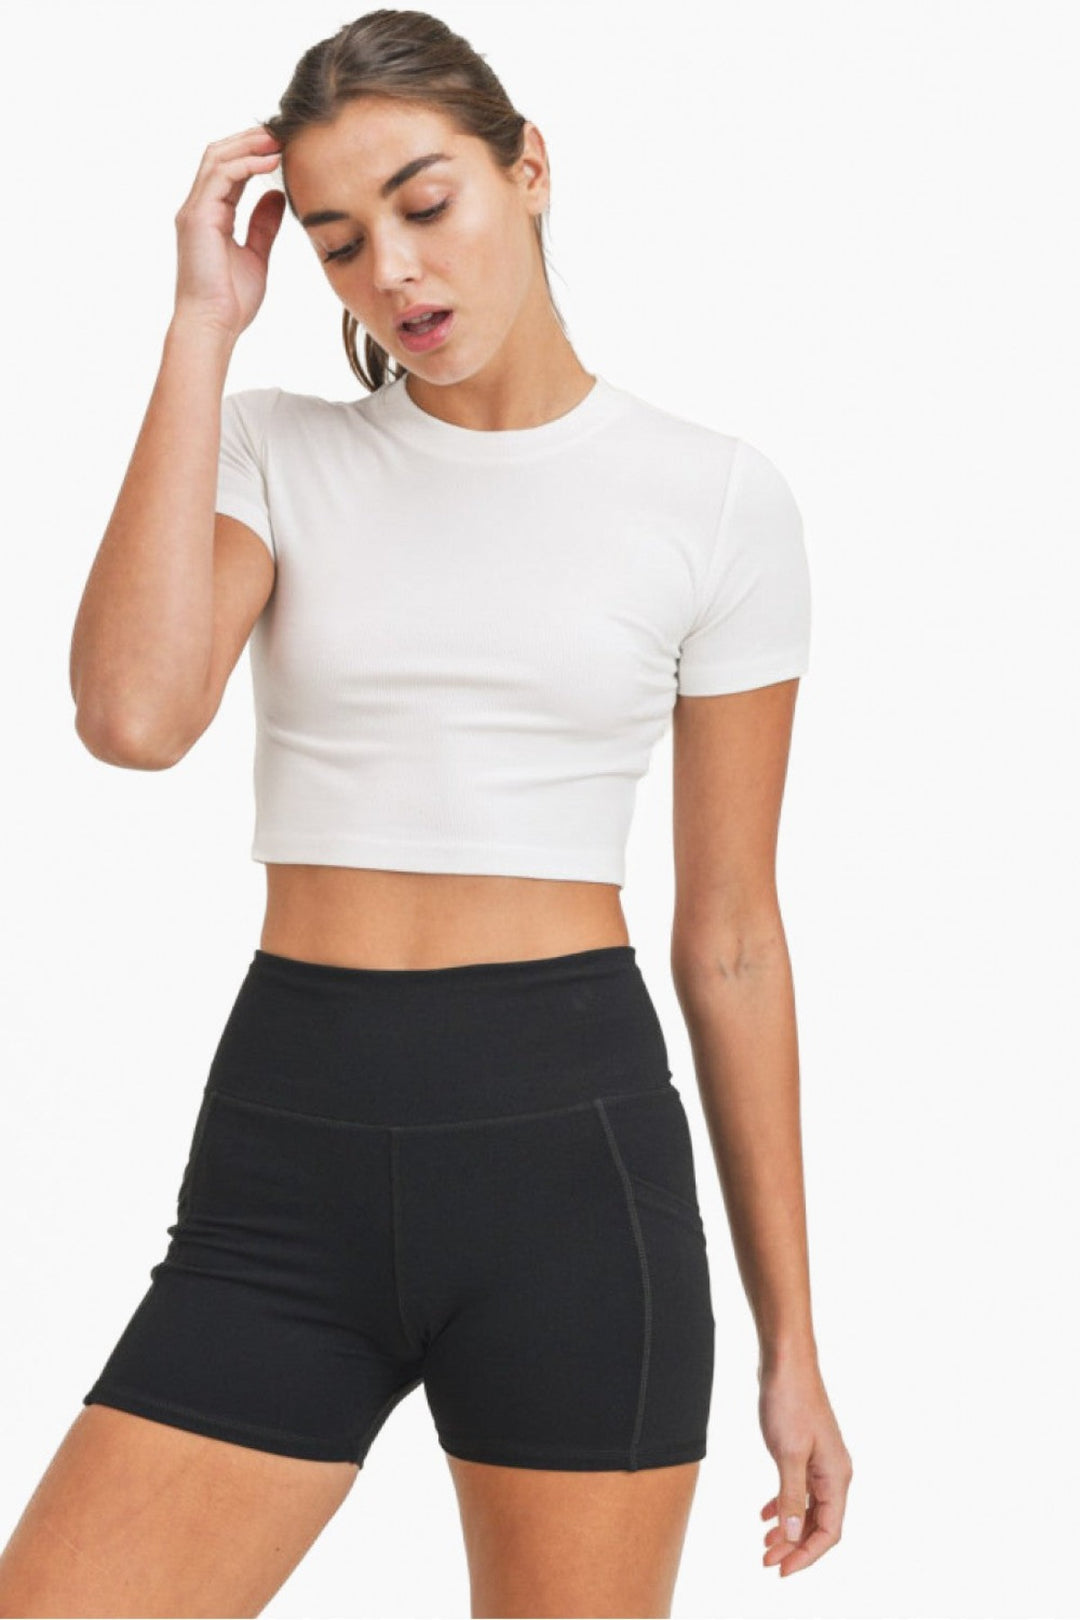 Whether as a workout top (worn over a sports bra and a pair of leggings) or as a cute top (matched with a denim item), this cropped tee is as versatile as it is comfortable. It has short sleeves, a rounded neckline, and a form-fitting silhouette.